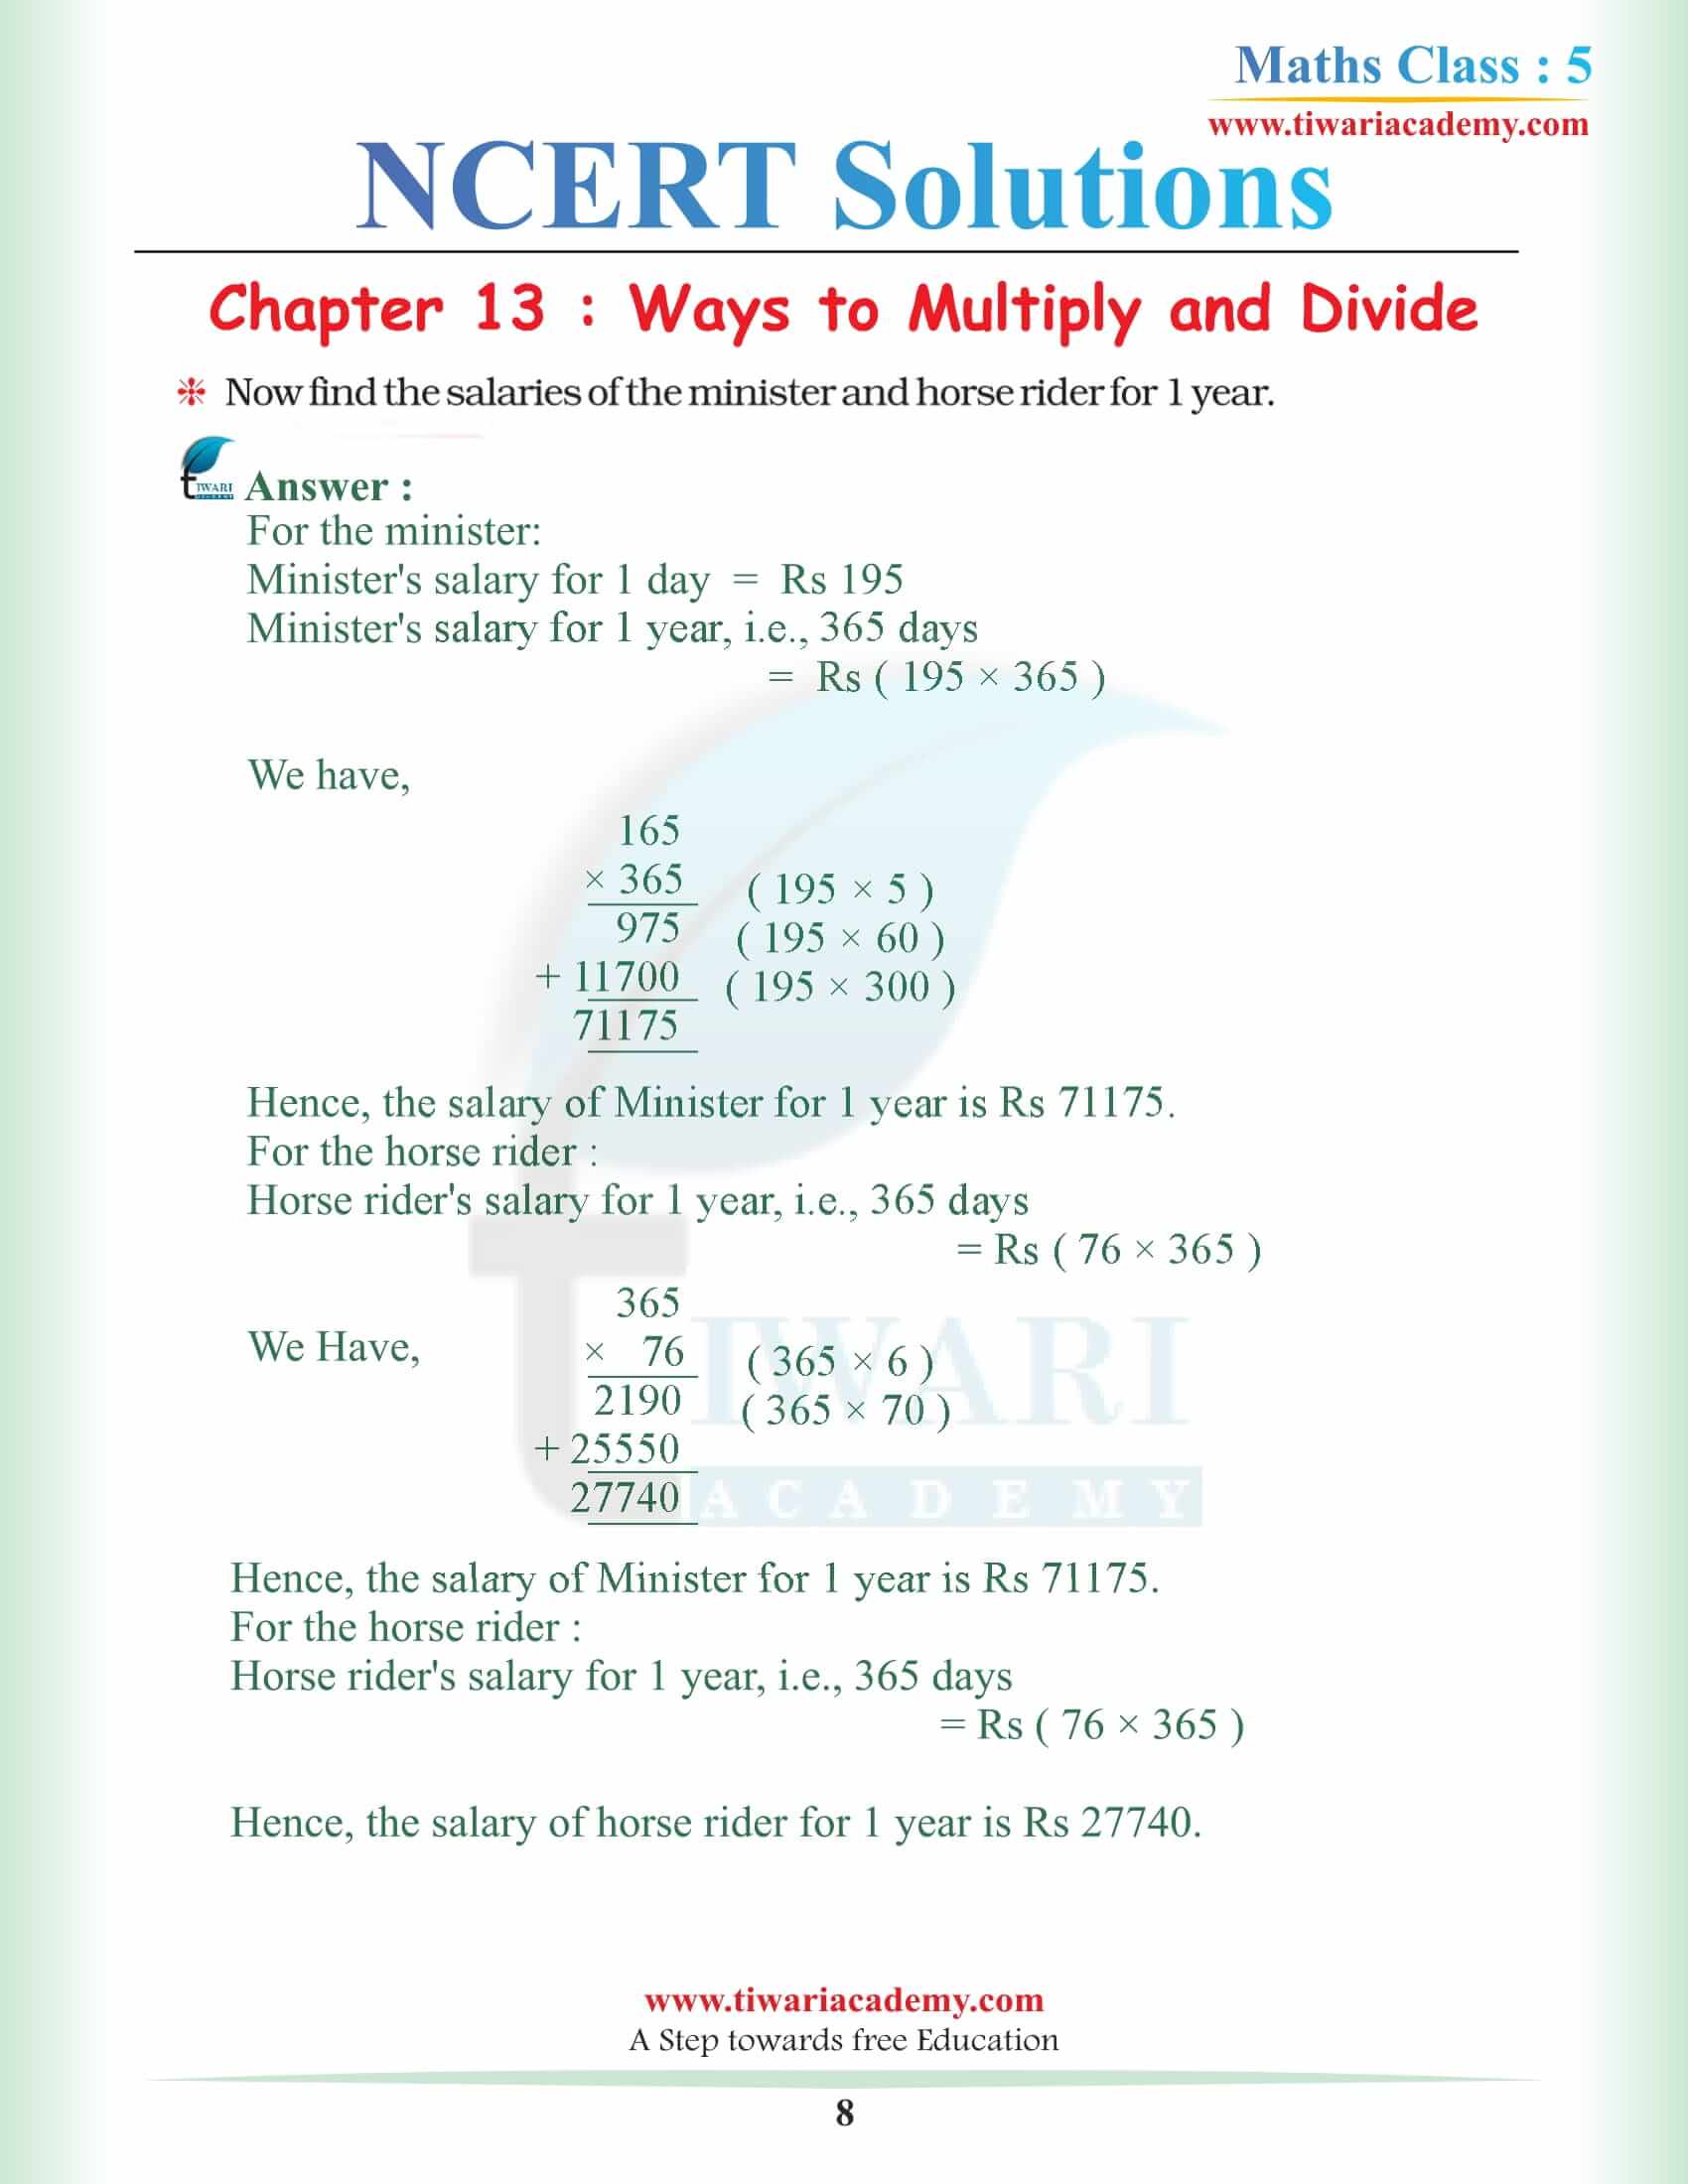 Class 5 Maths Chapter 13 Solutions in PDF file